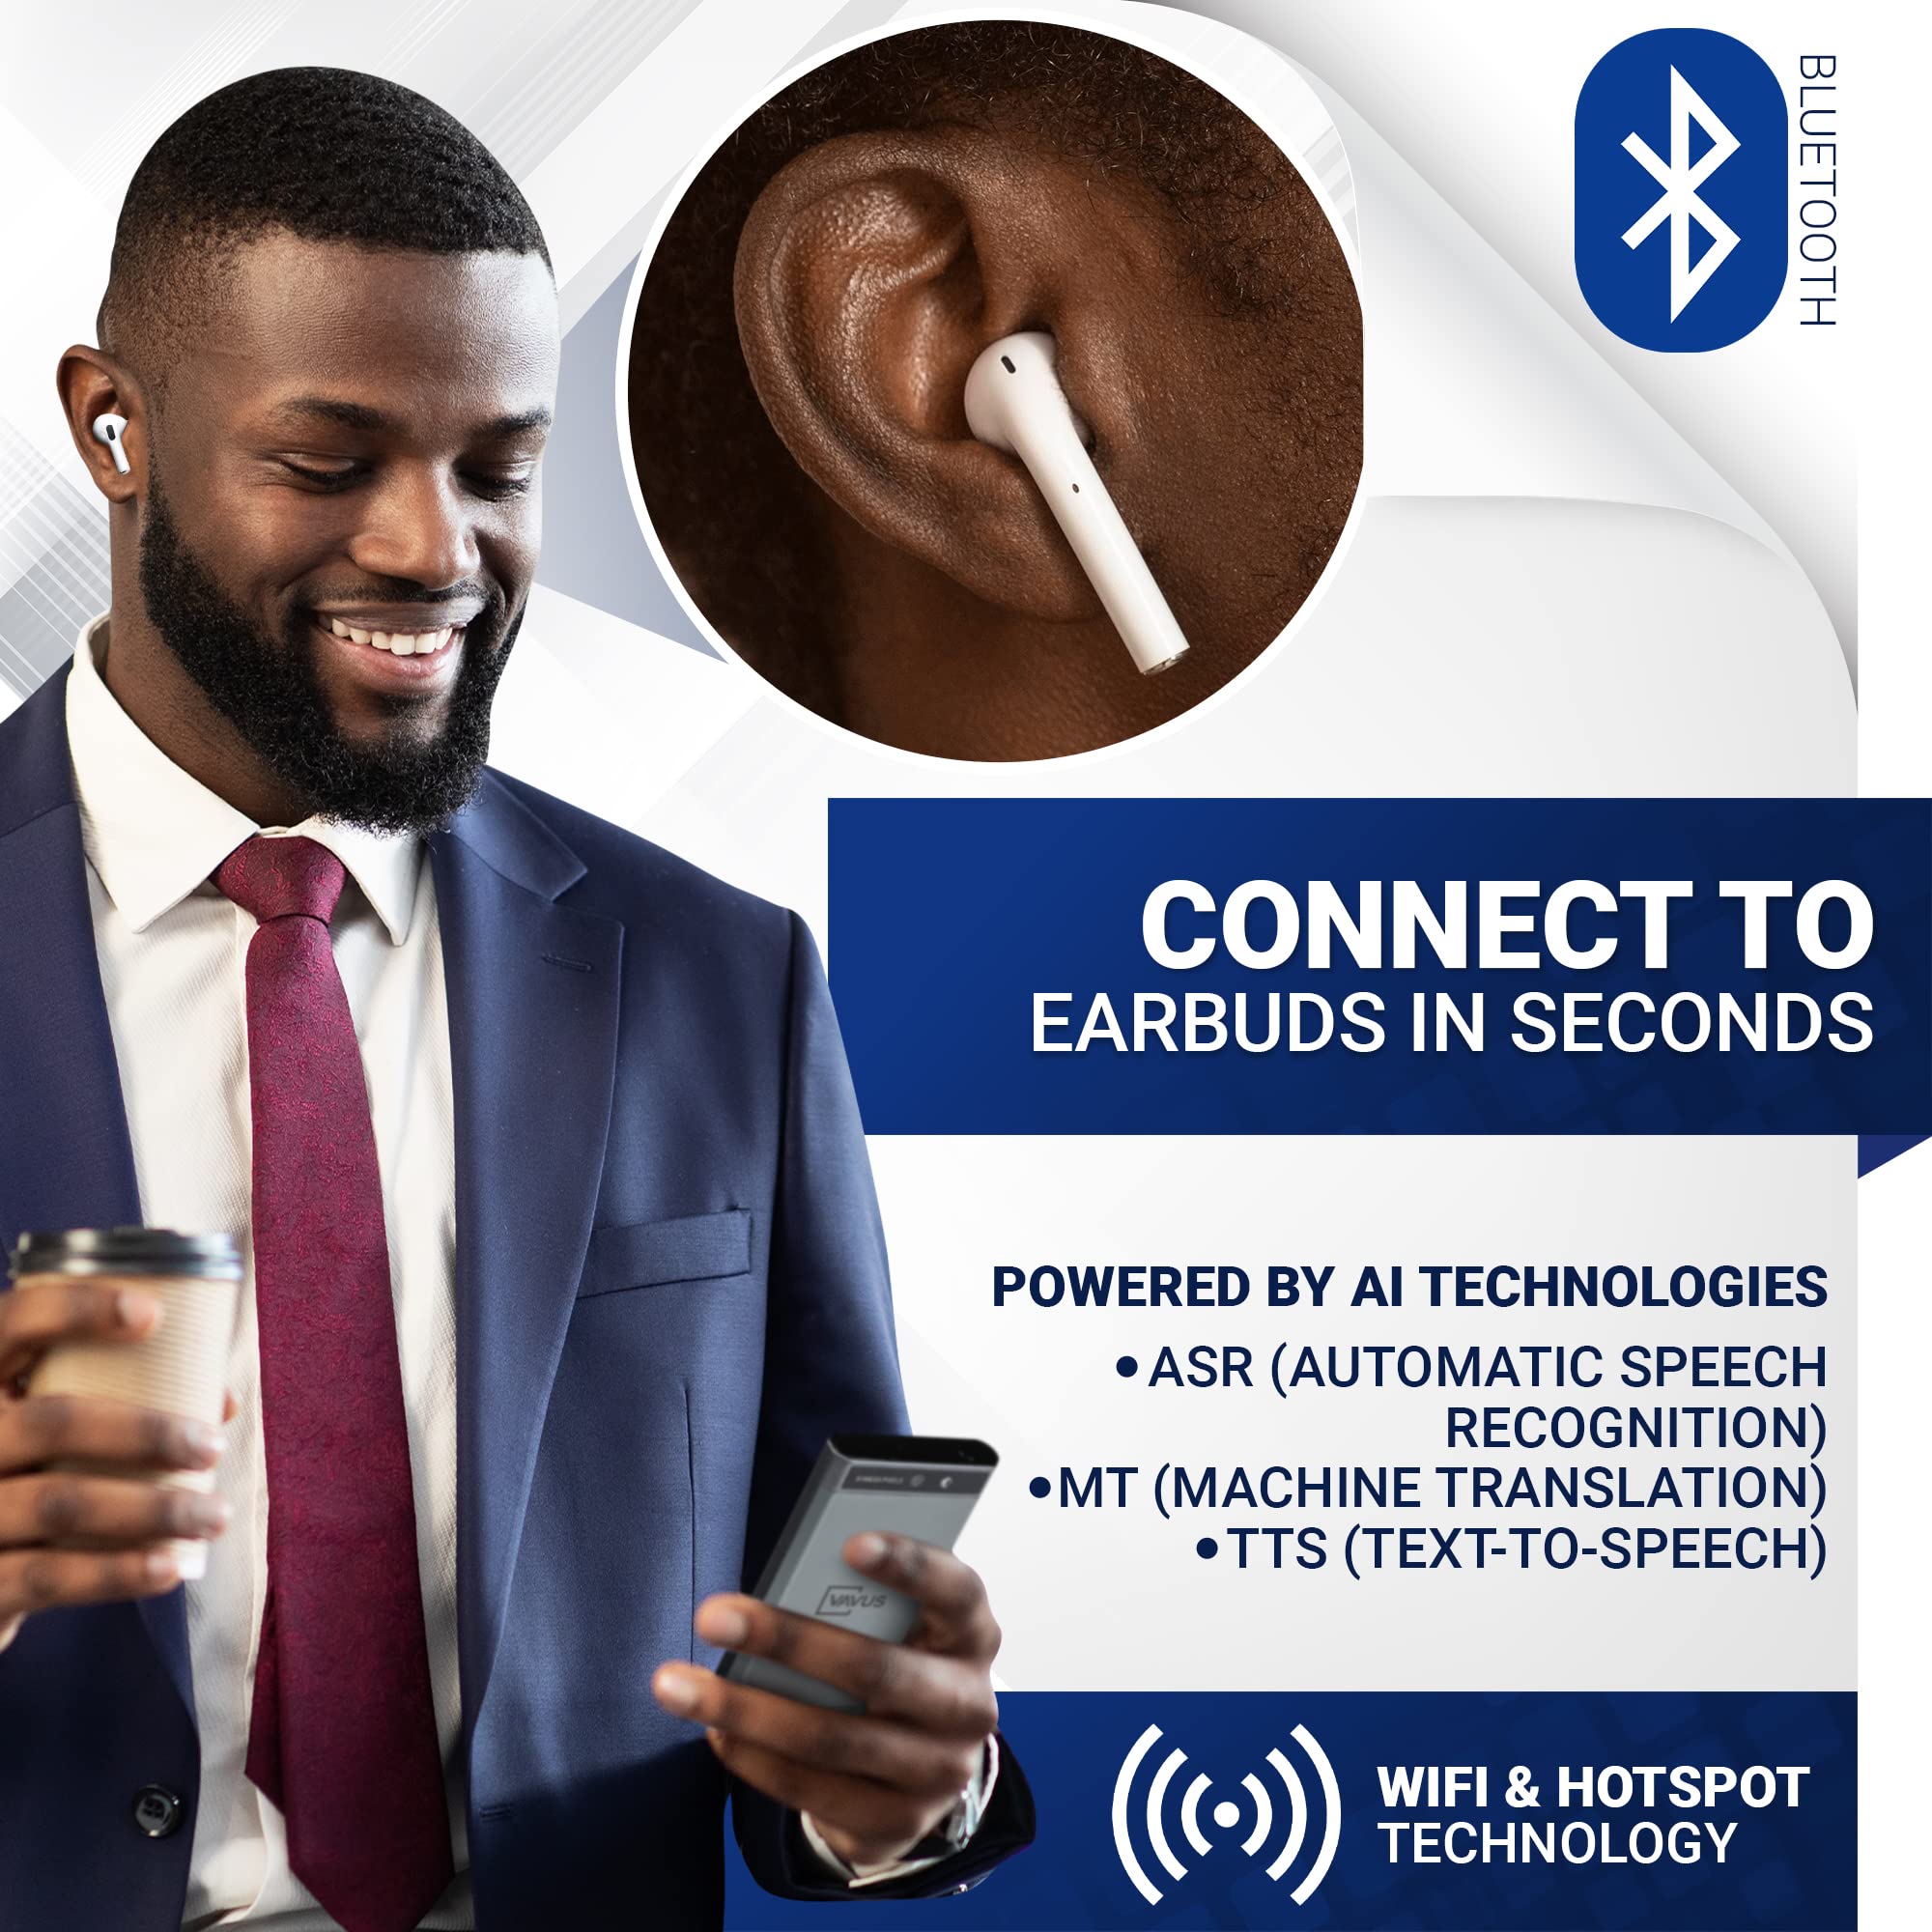 Vavus Language Translator Device - Built-in Data Plan -Sim Card, WiFi & Offline Translation - 109 Languages and dialects, Bluetooth for Earbuds, Instant Two-Way Voice Translator and Photo Translation